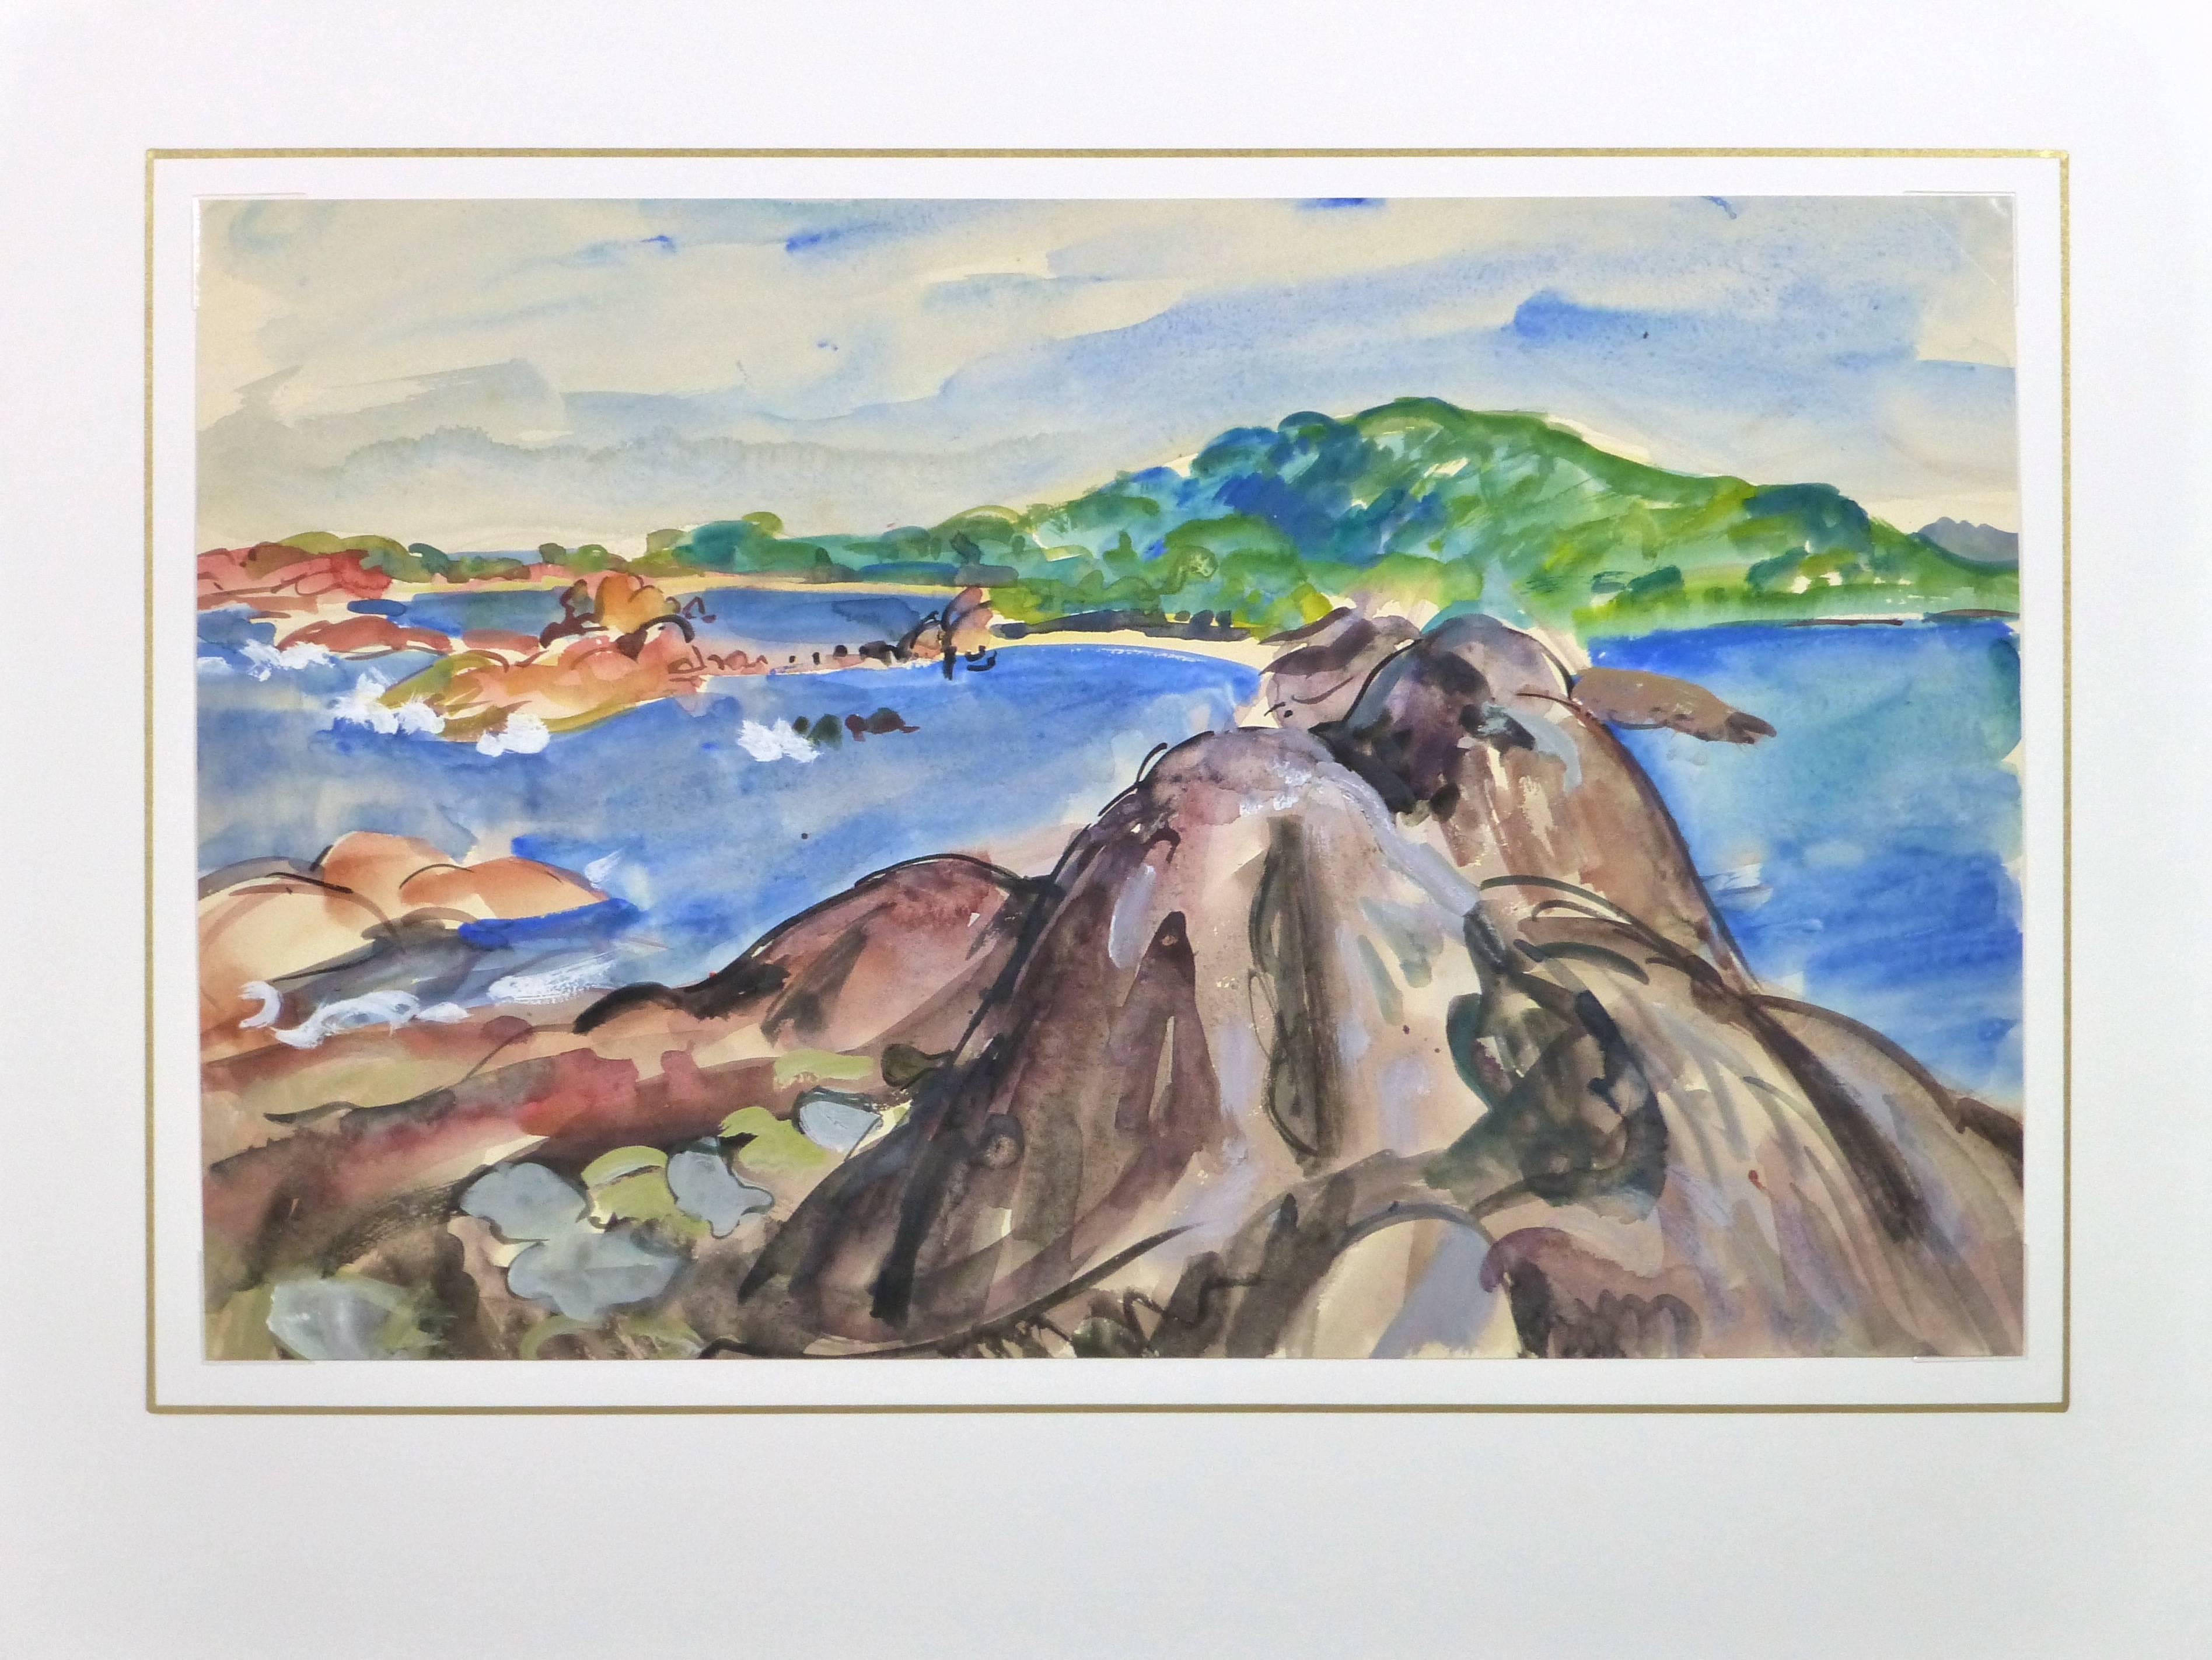 Striking watercolor seascape of a rocky inlet circling an island lush with dense foliage by French artist Stephane Magnard, circa 1950. 

Original one-of-a-kind artwork on paper displayed on a white mat with a gold border. Mat fits a standard-size